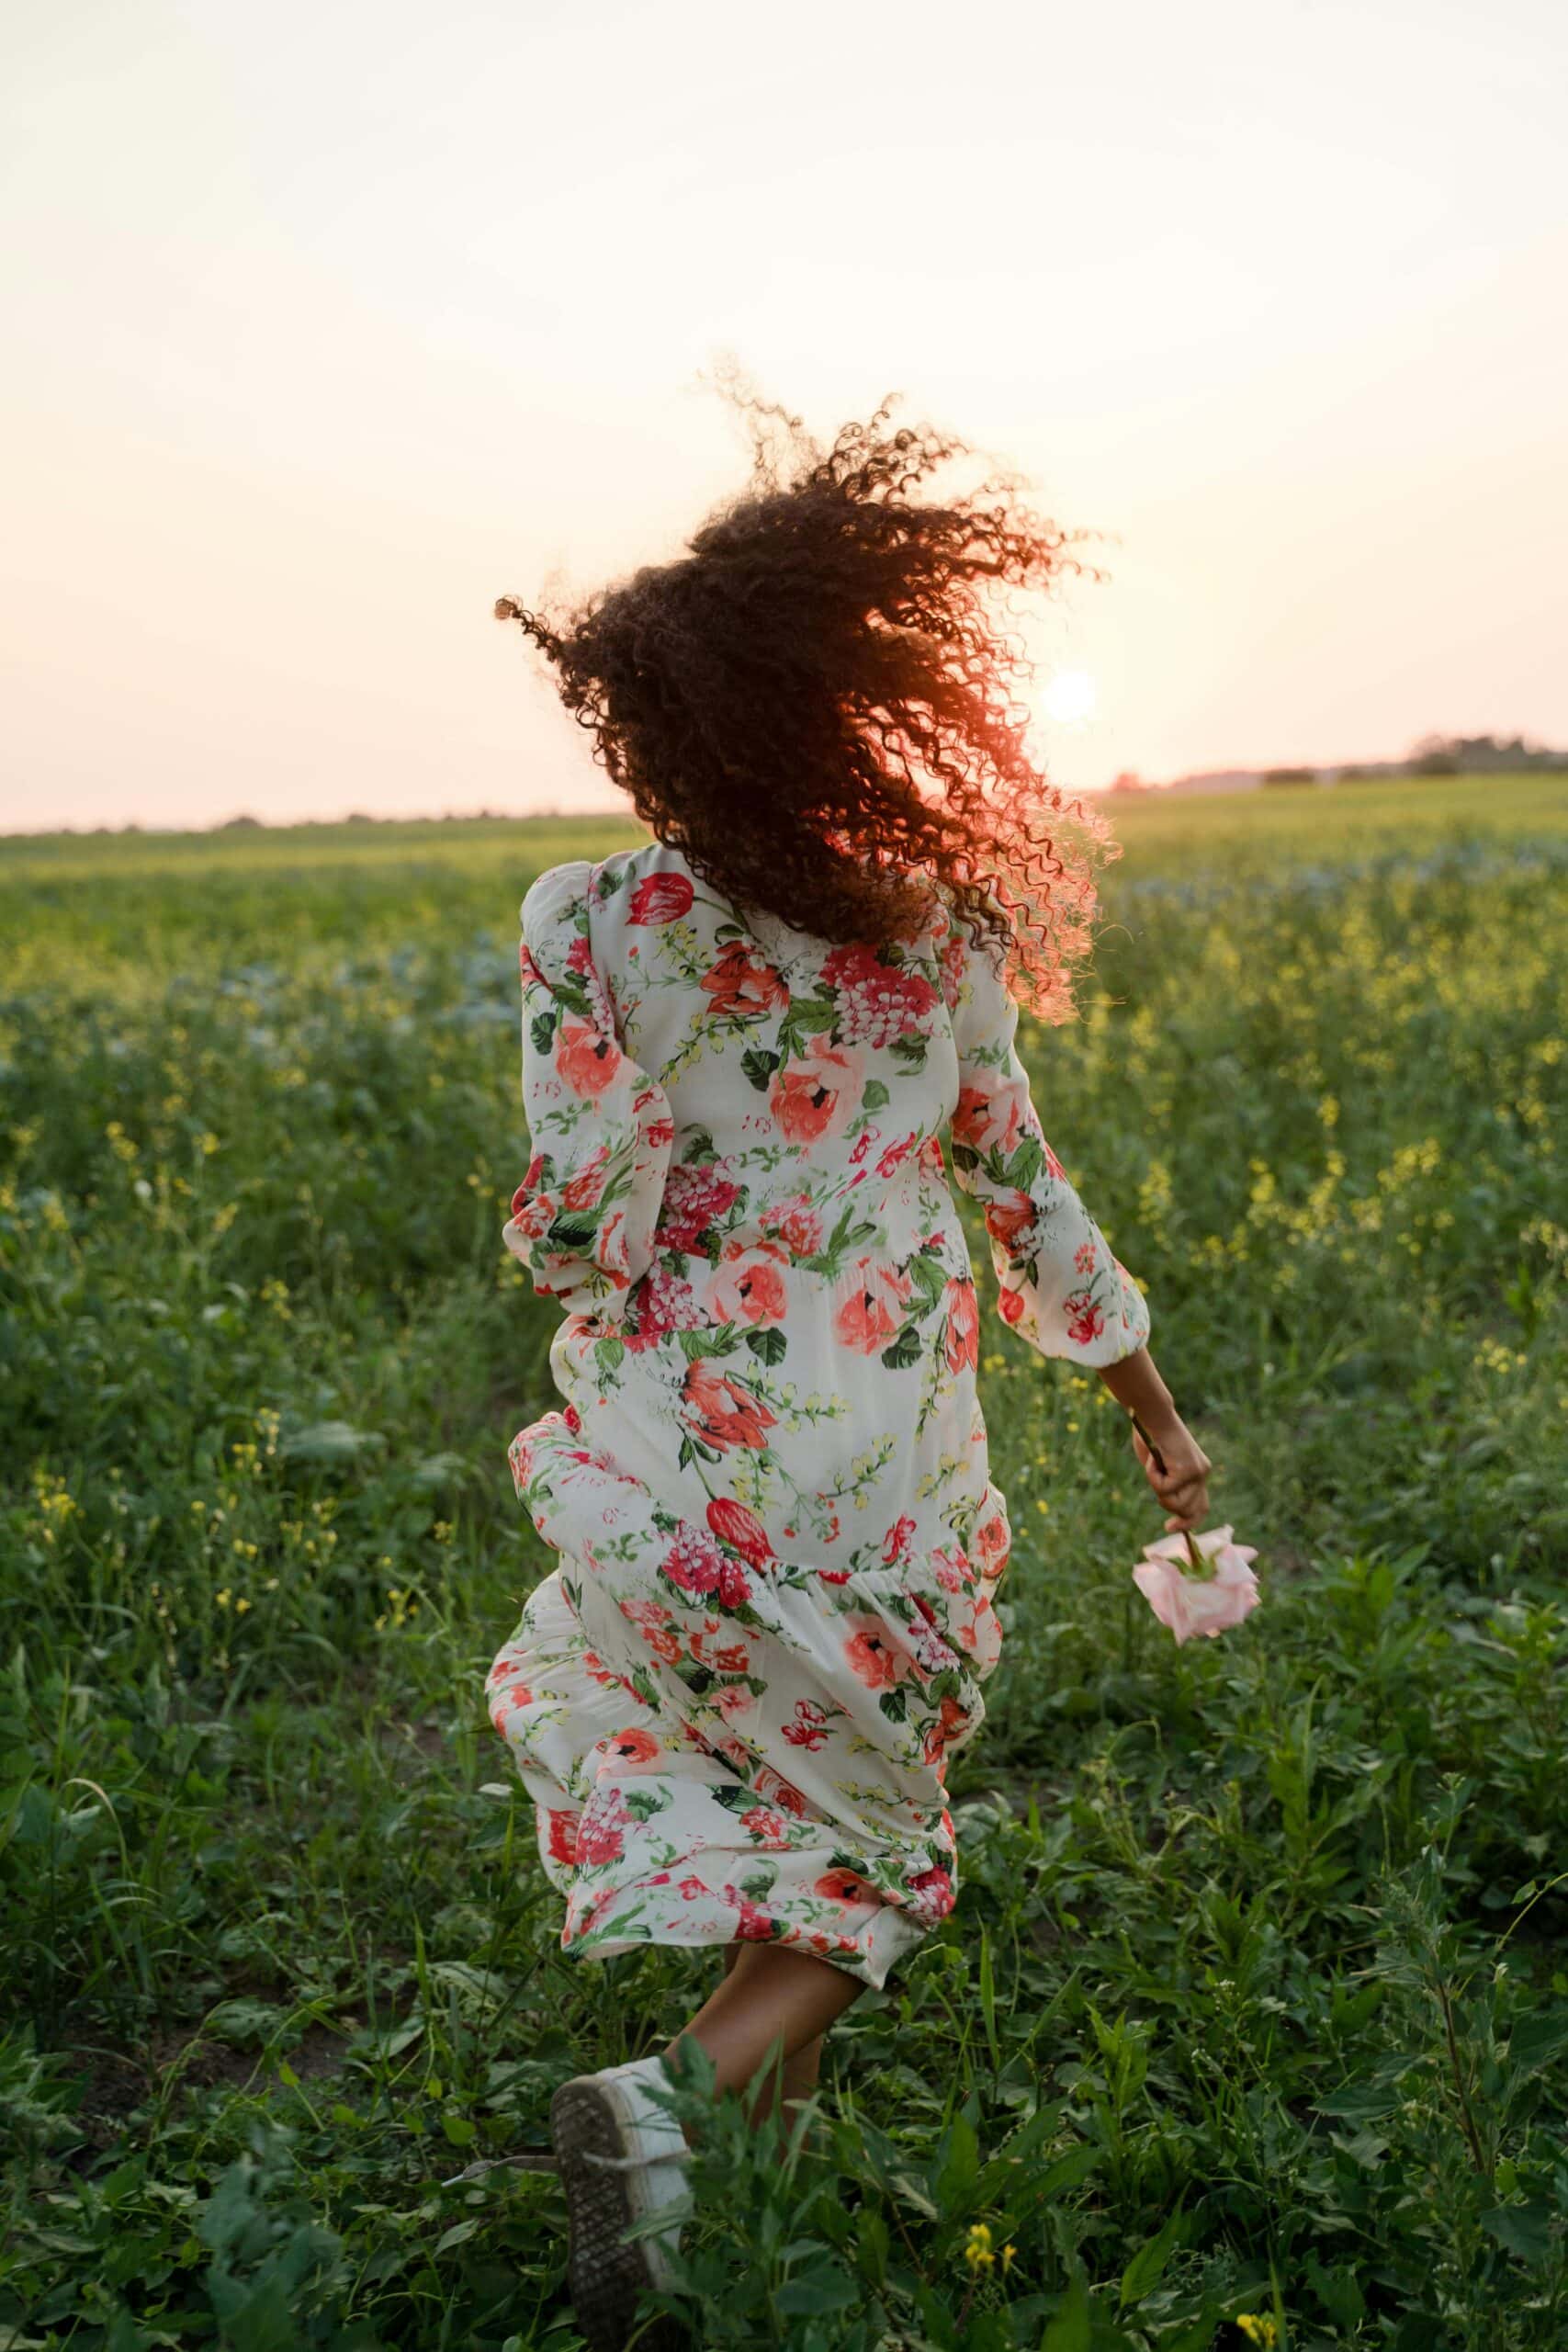 7 tips to feeling your best. This is an image of a woman who is happily running through a nature field.